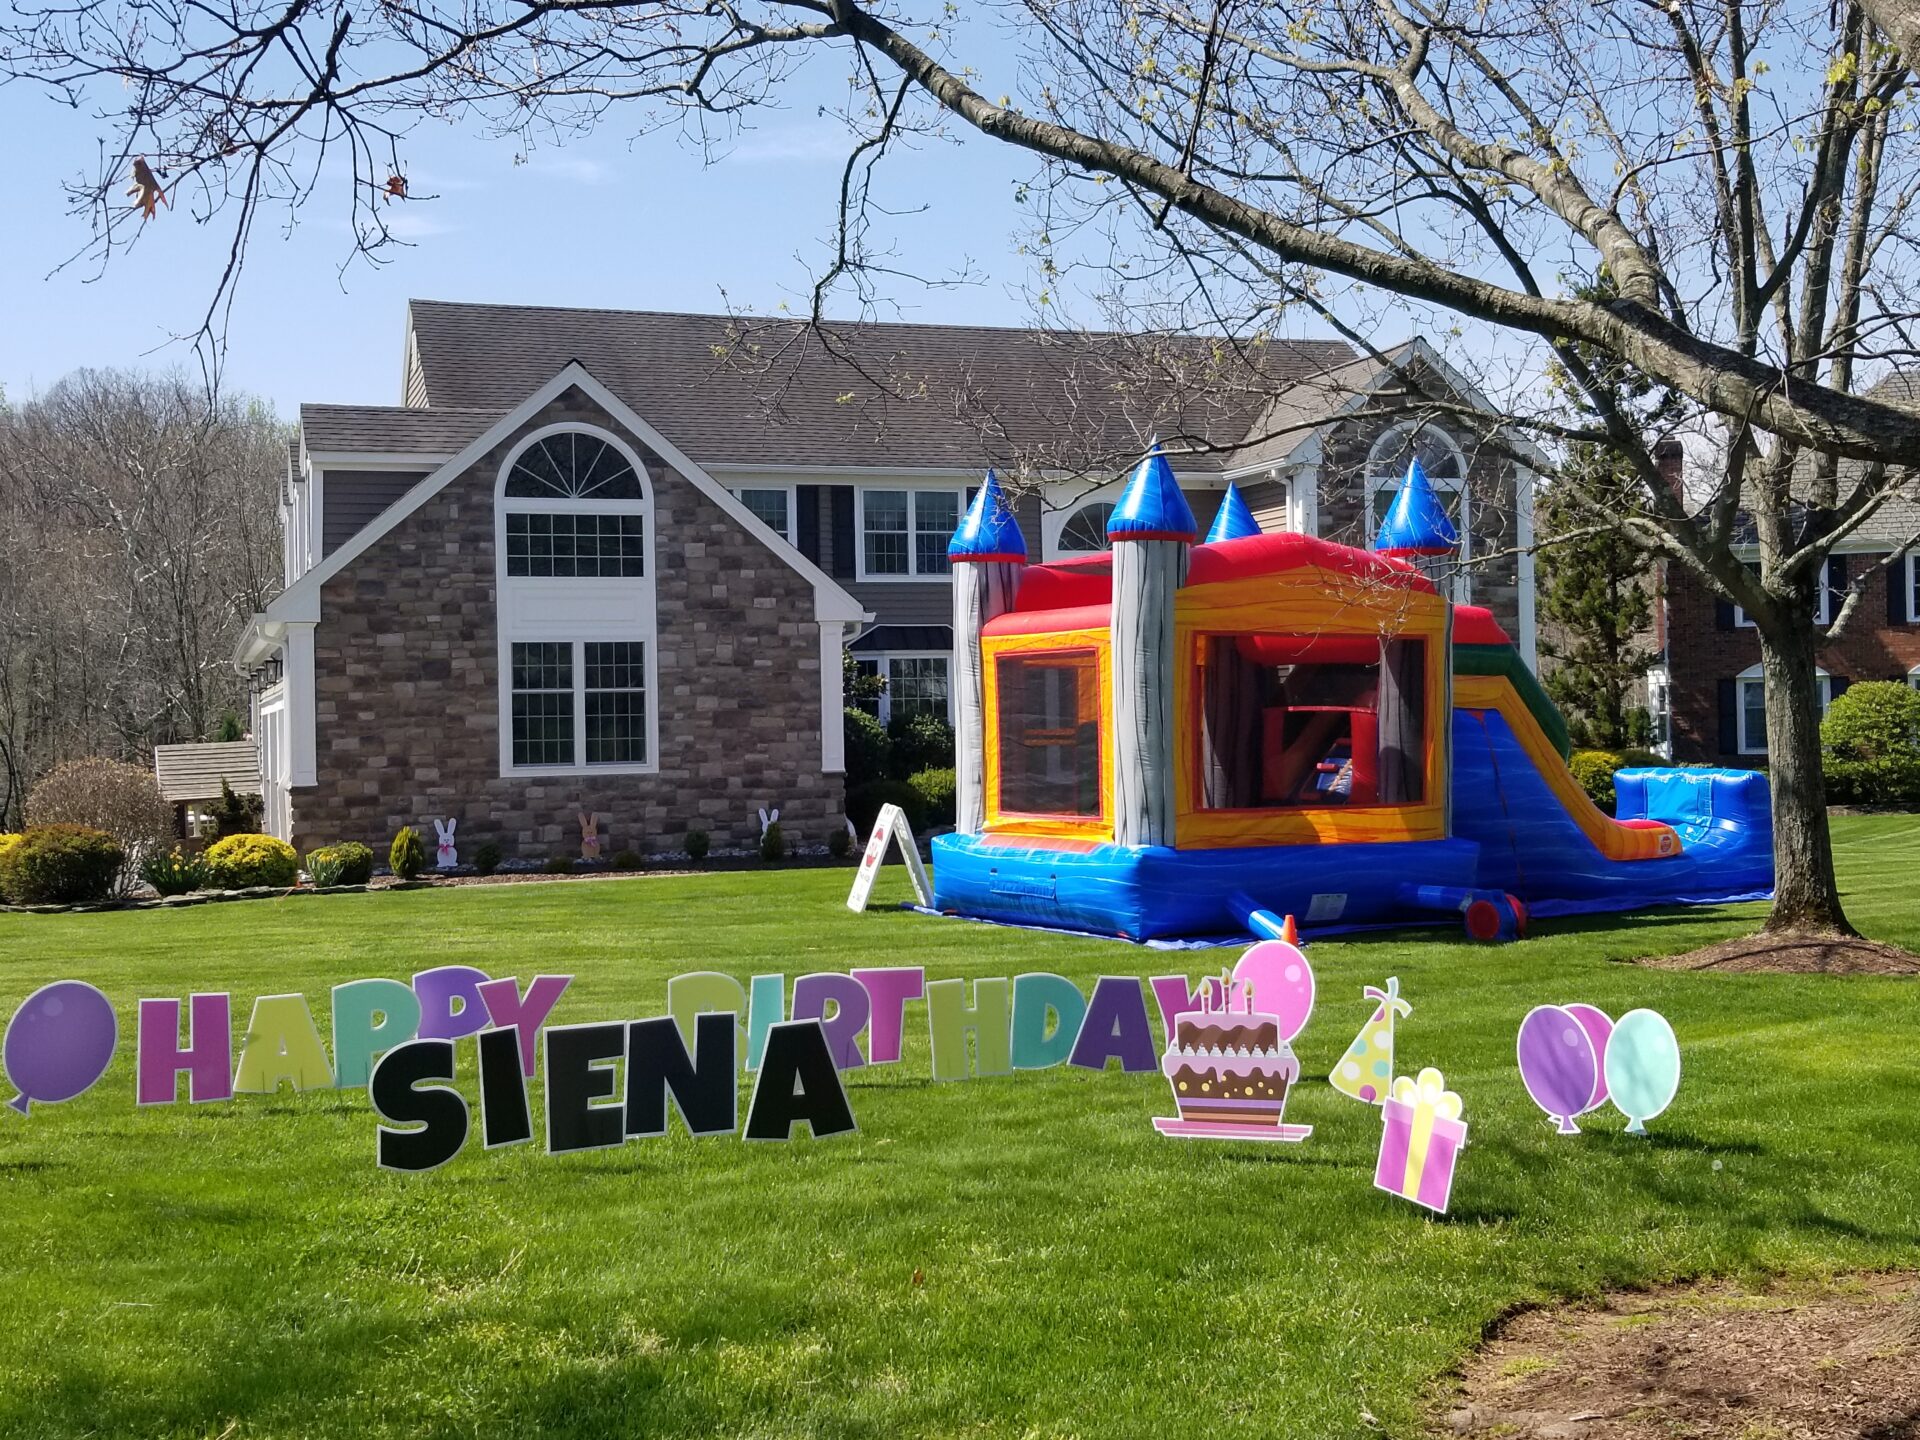 Siena's first birthday party.